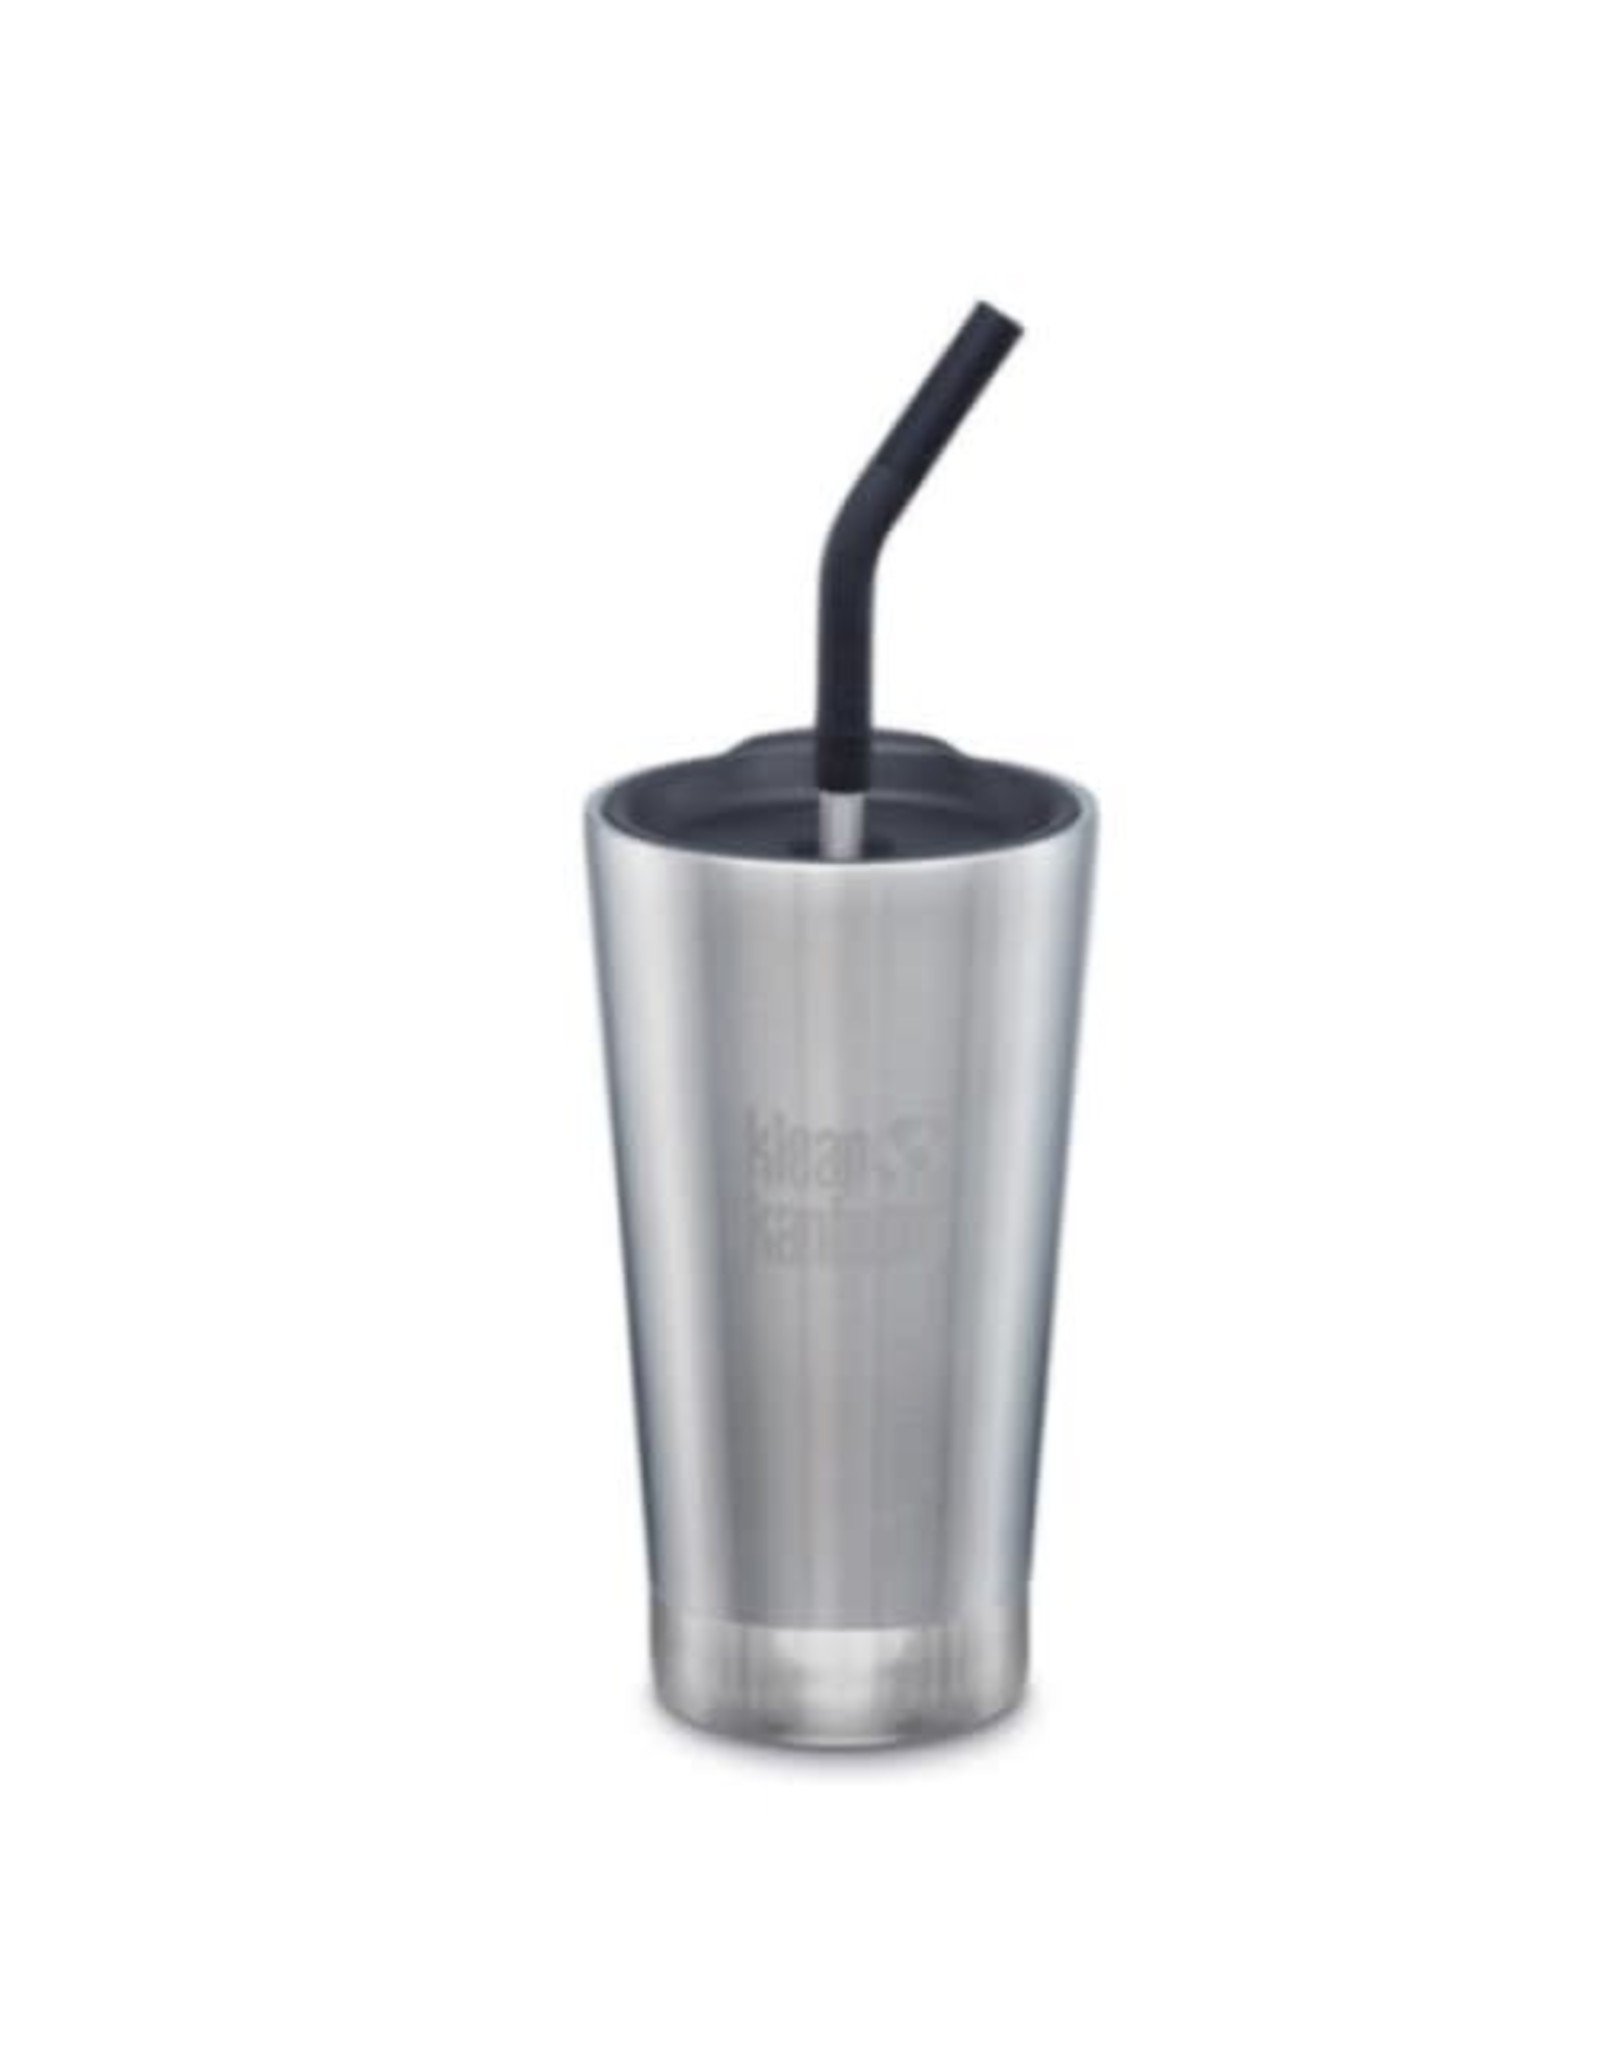 Klean Kanteen Insulated Tumbler 16oz w/ Straw - Brushed Stainless